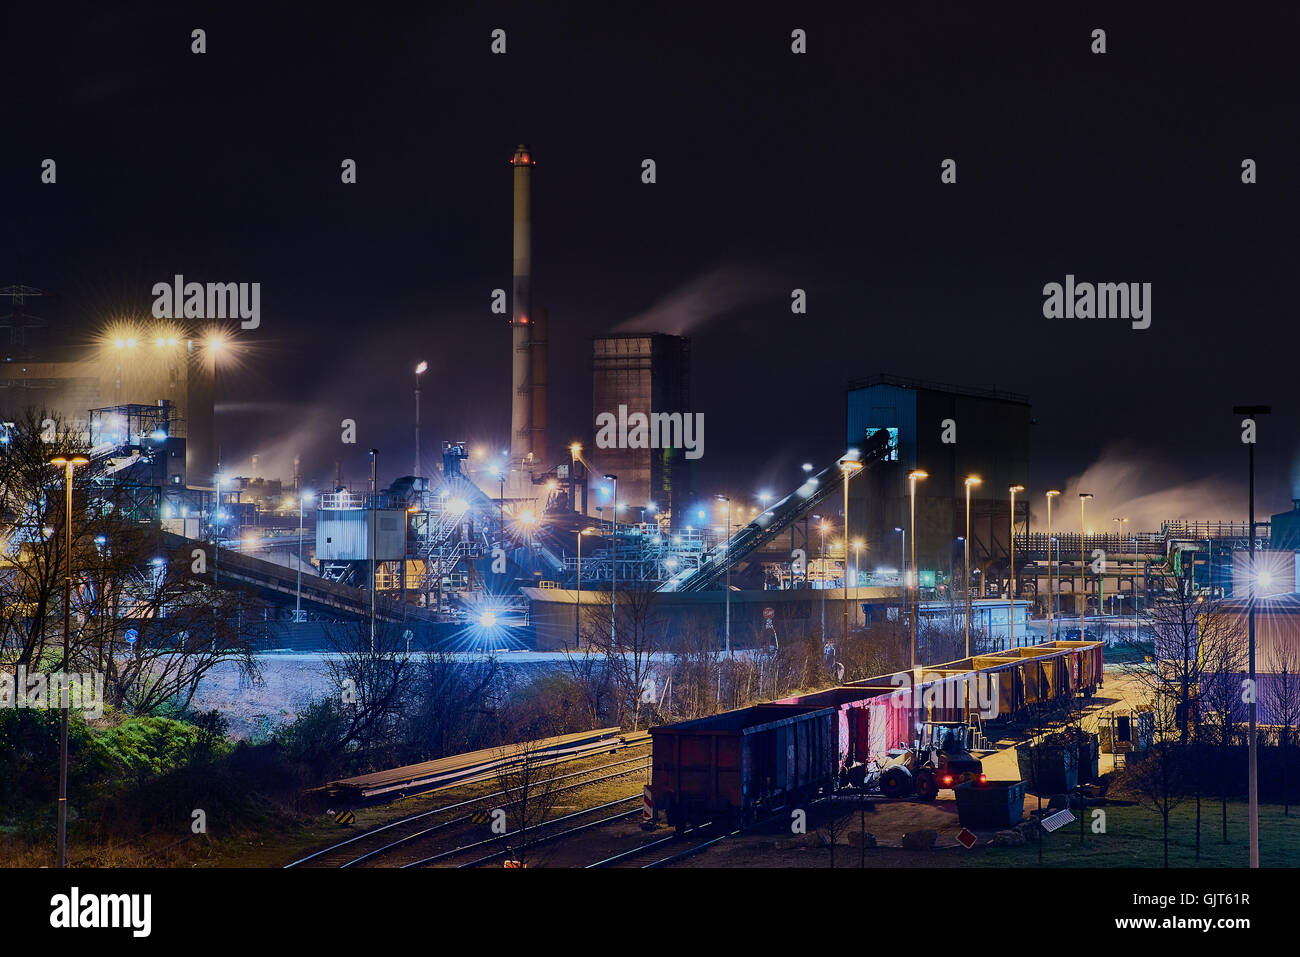 Steelplant in Duisburg, Germany, at night with a train in the front of the scene - very surreal Stock Photo